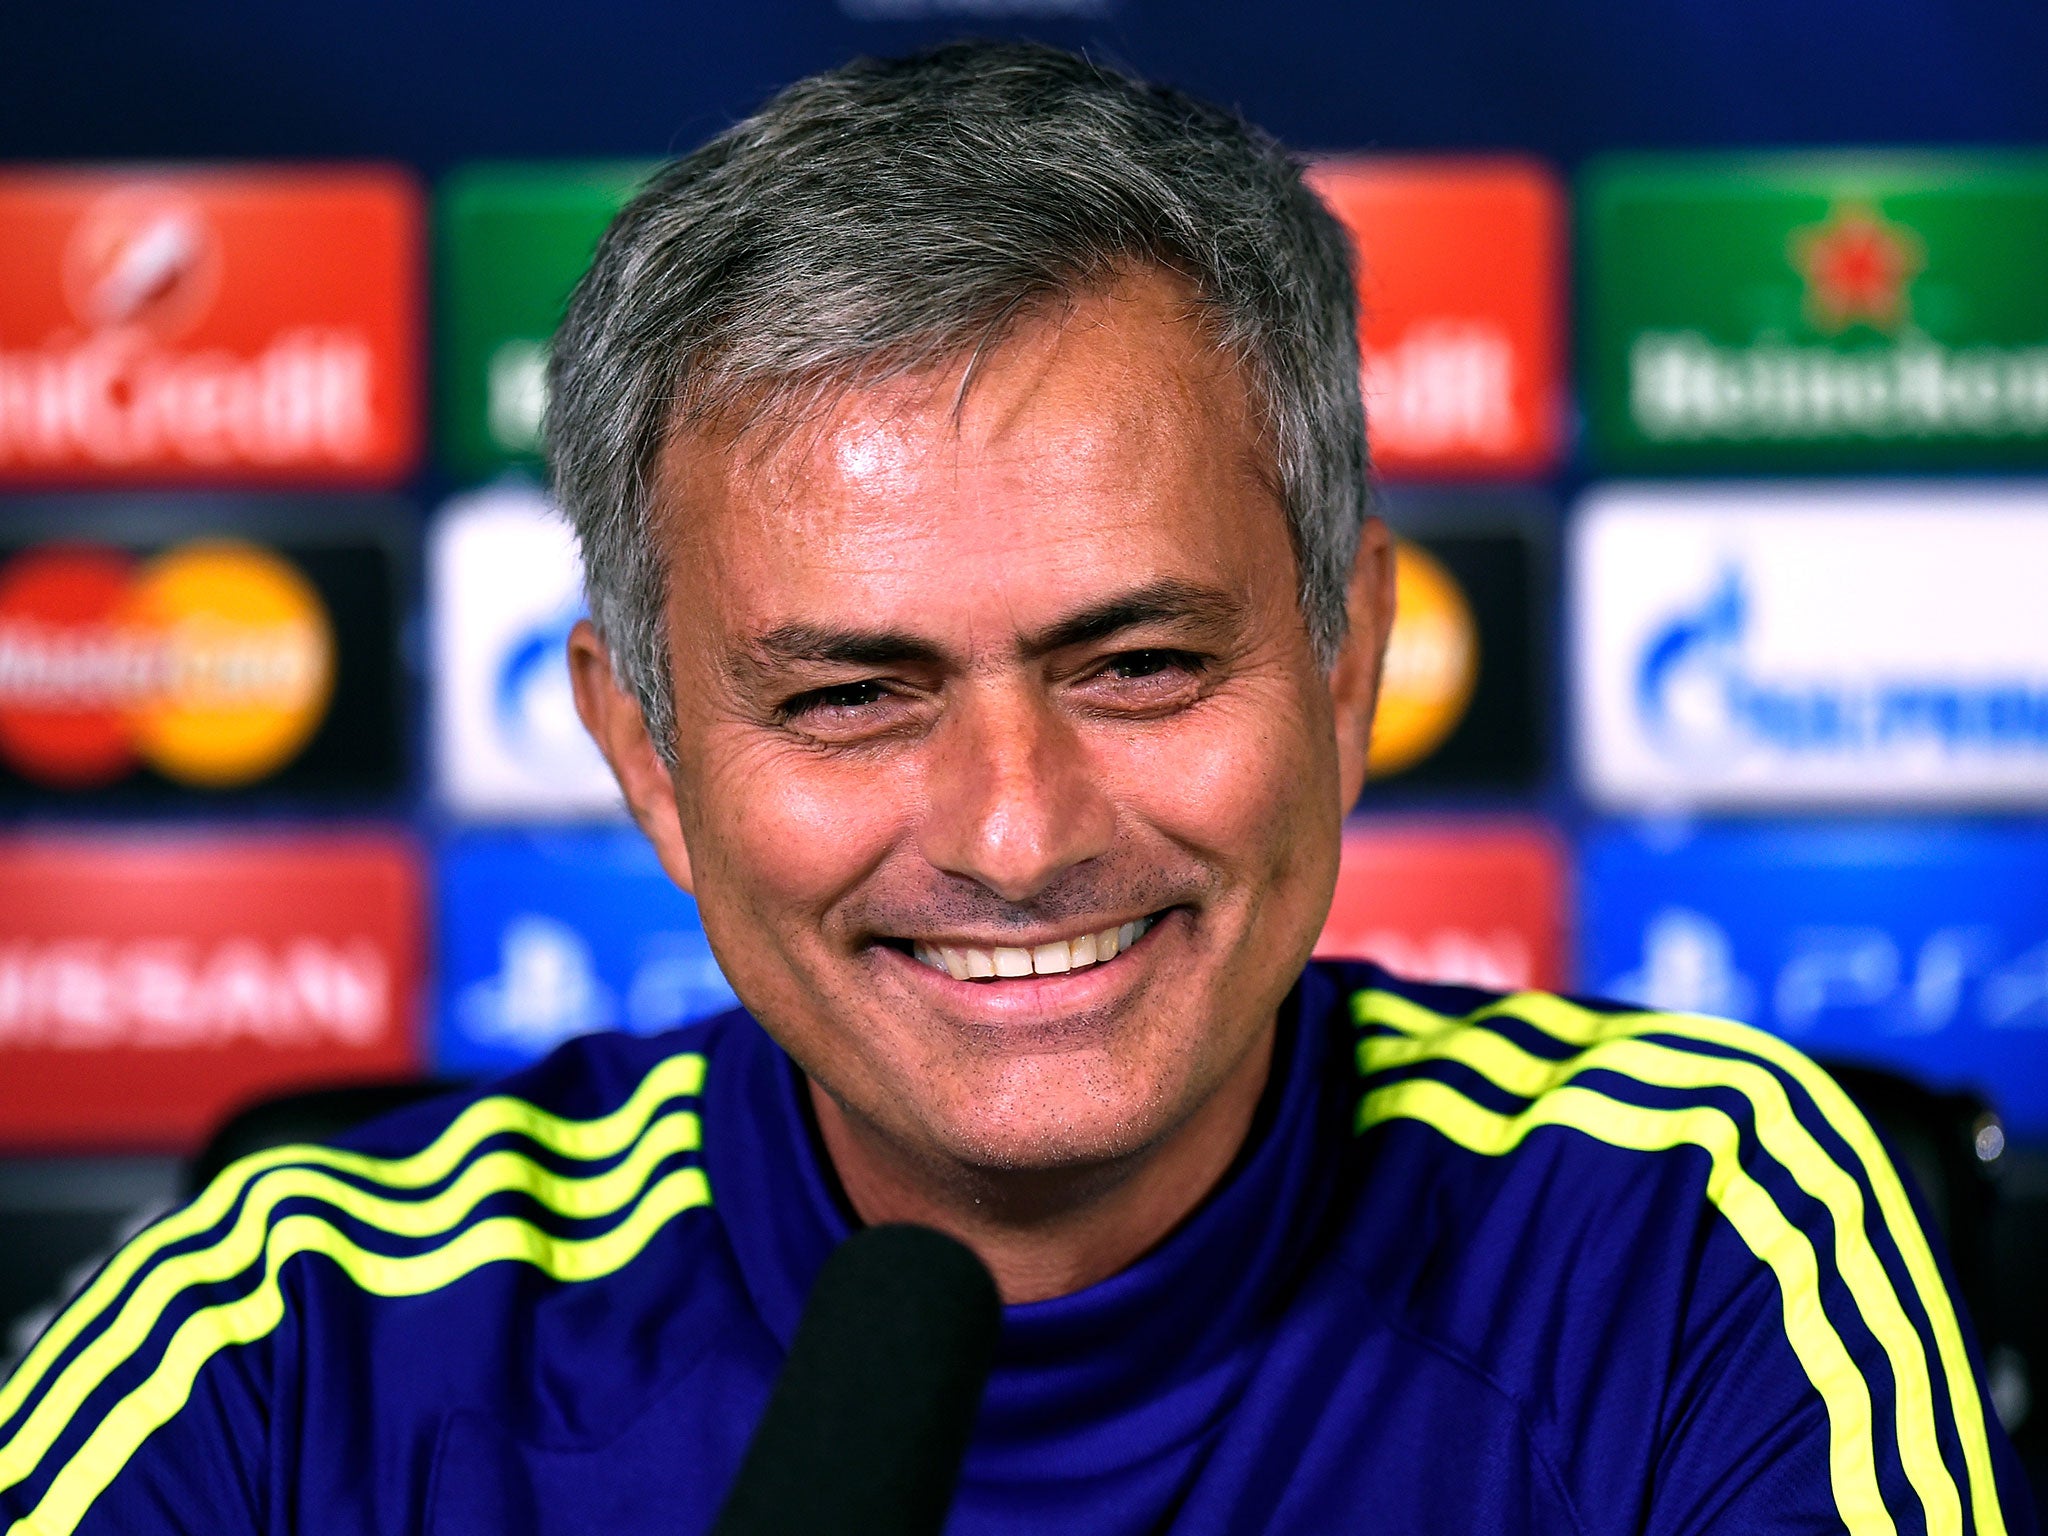 Jose Mourinho smiles during his pre-match press conference ahead of the Champions League tie with Maribor